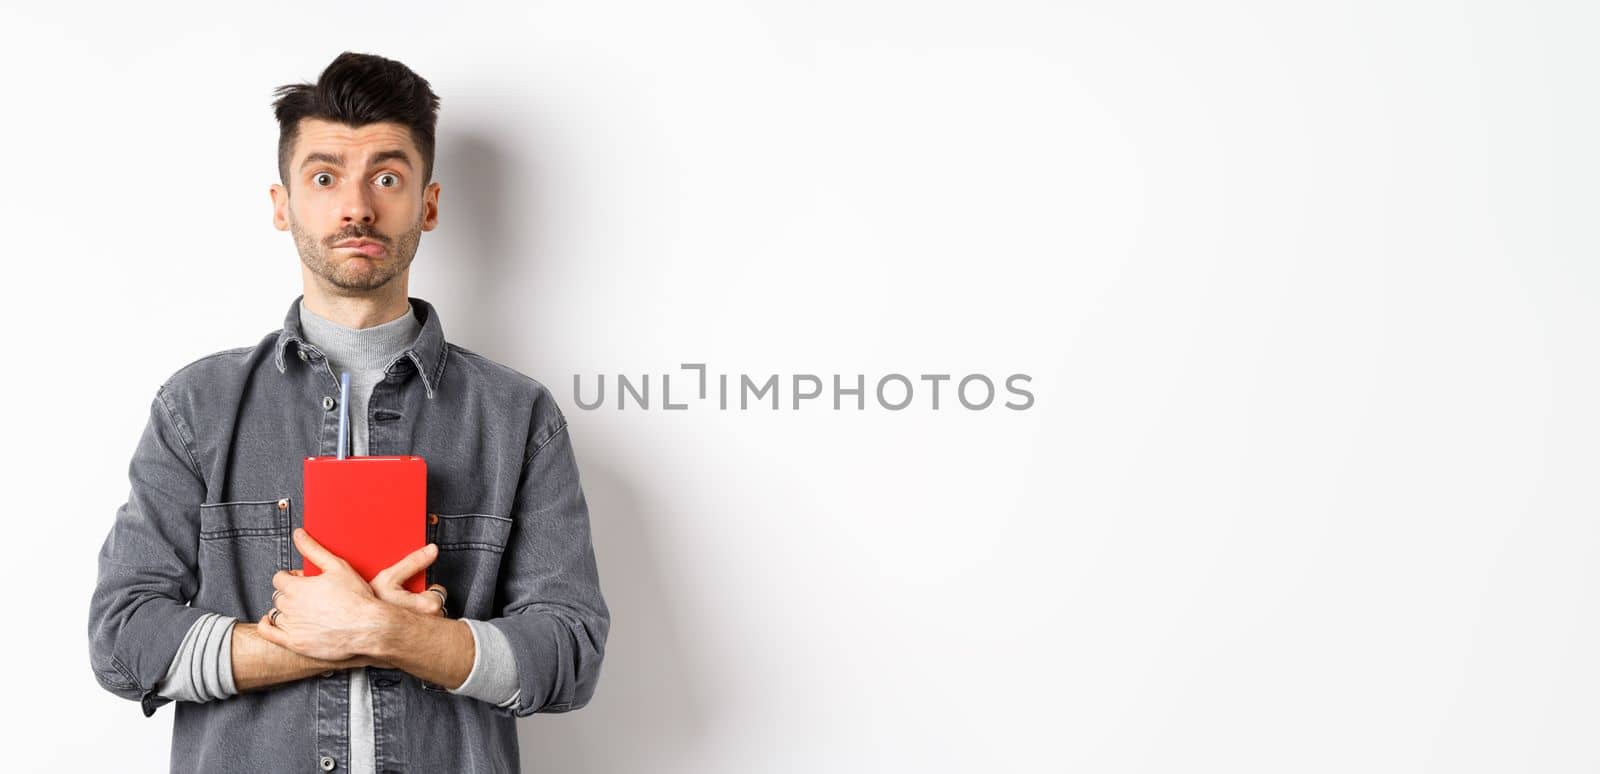 Cute and shy guy hugging his diary, holding red journal and look modest at camera, standing against white background.